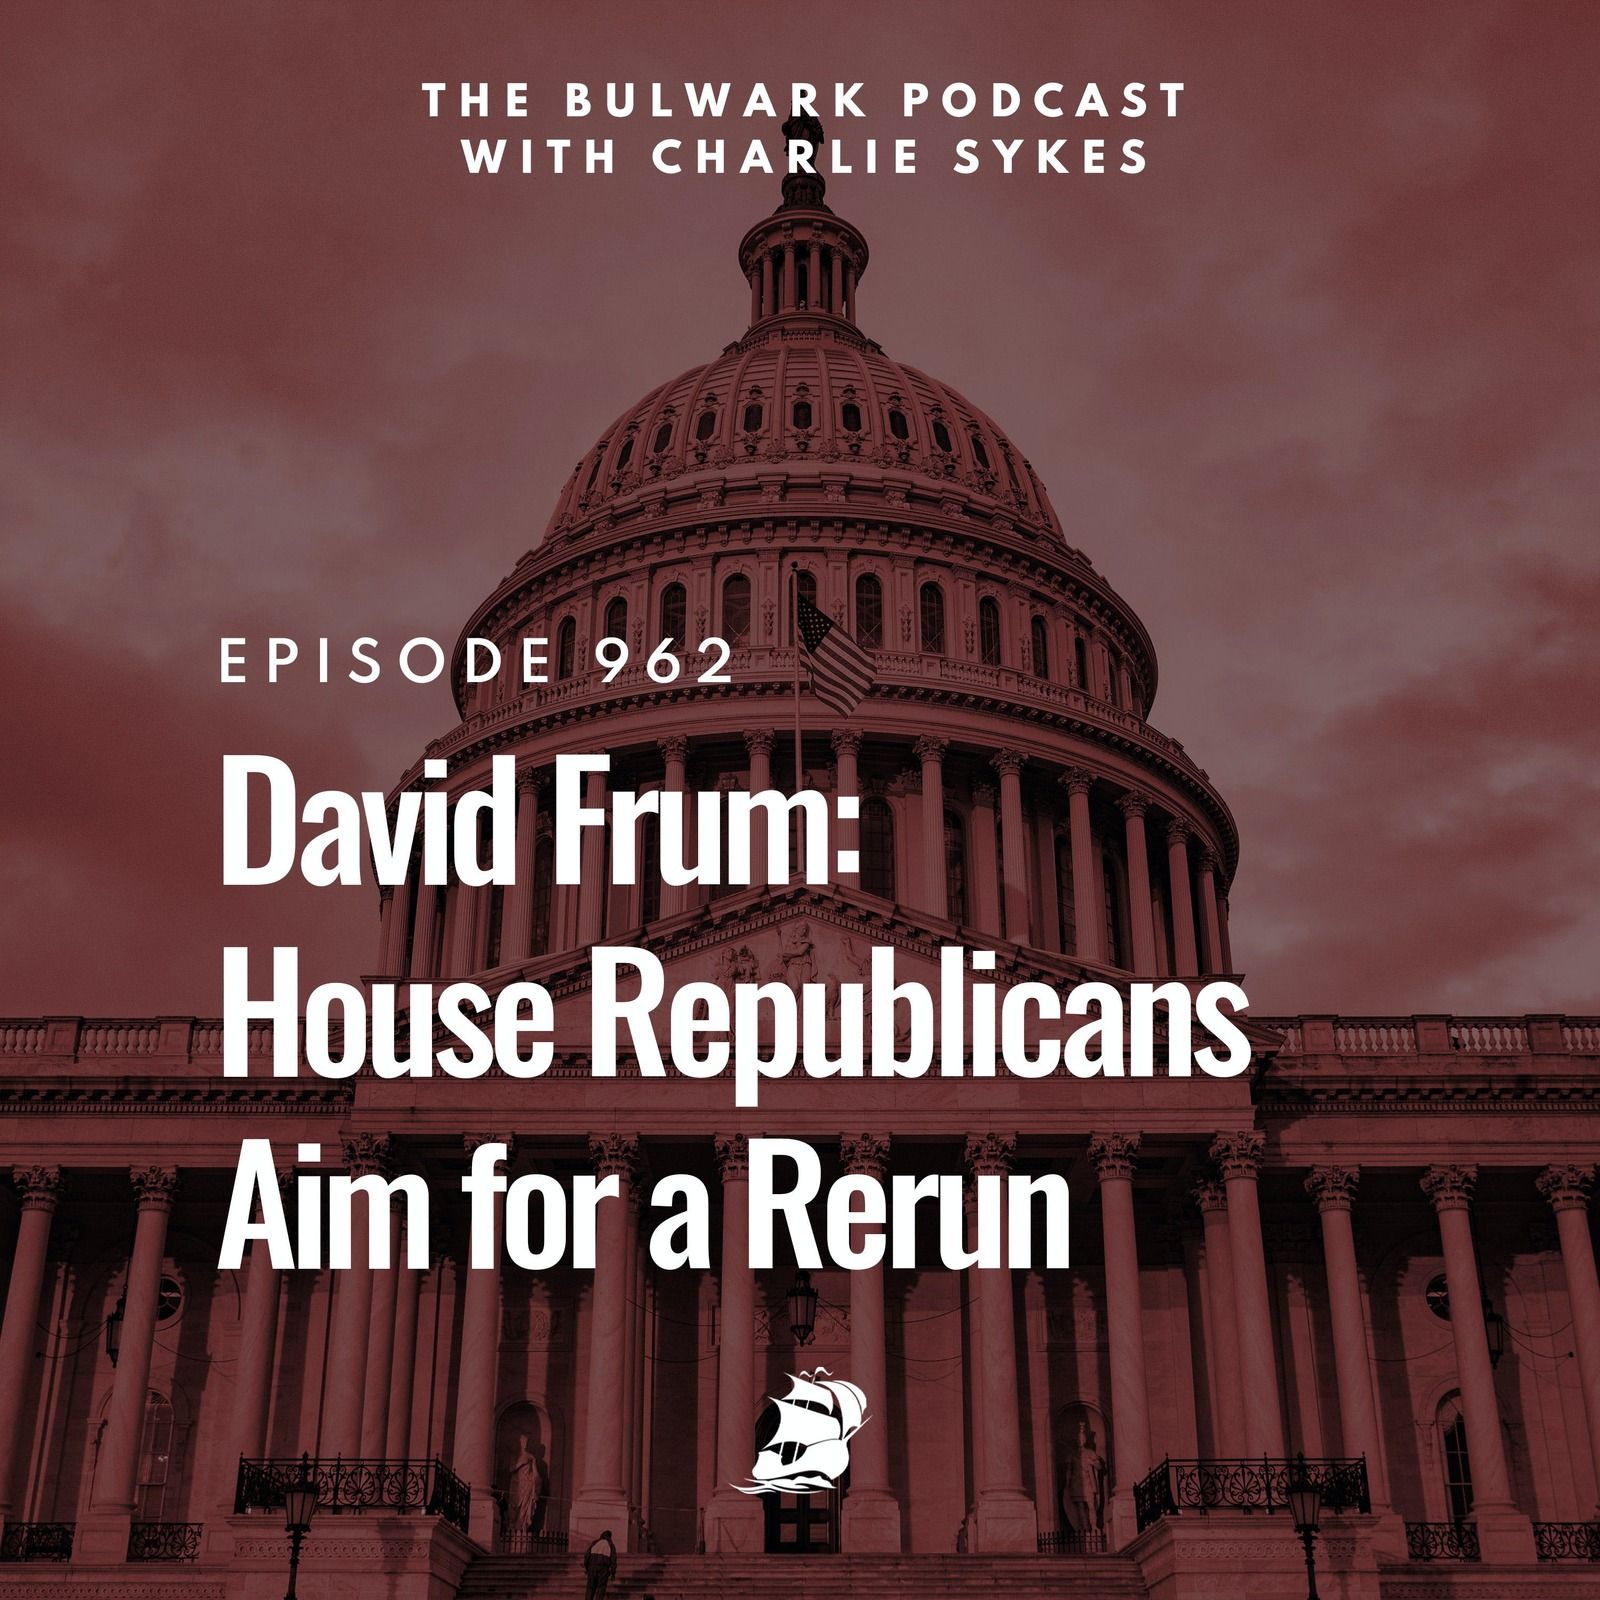 David Frum: House Republicans Aim for a Rerun by The Bulwark Podcast